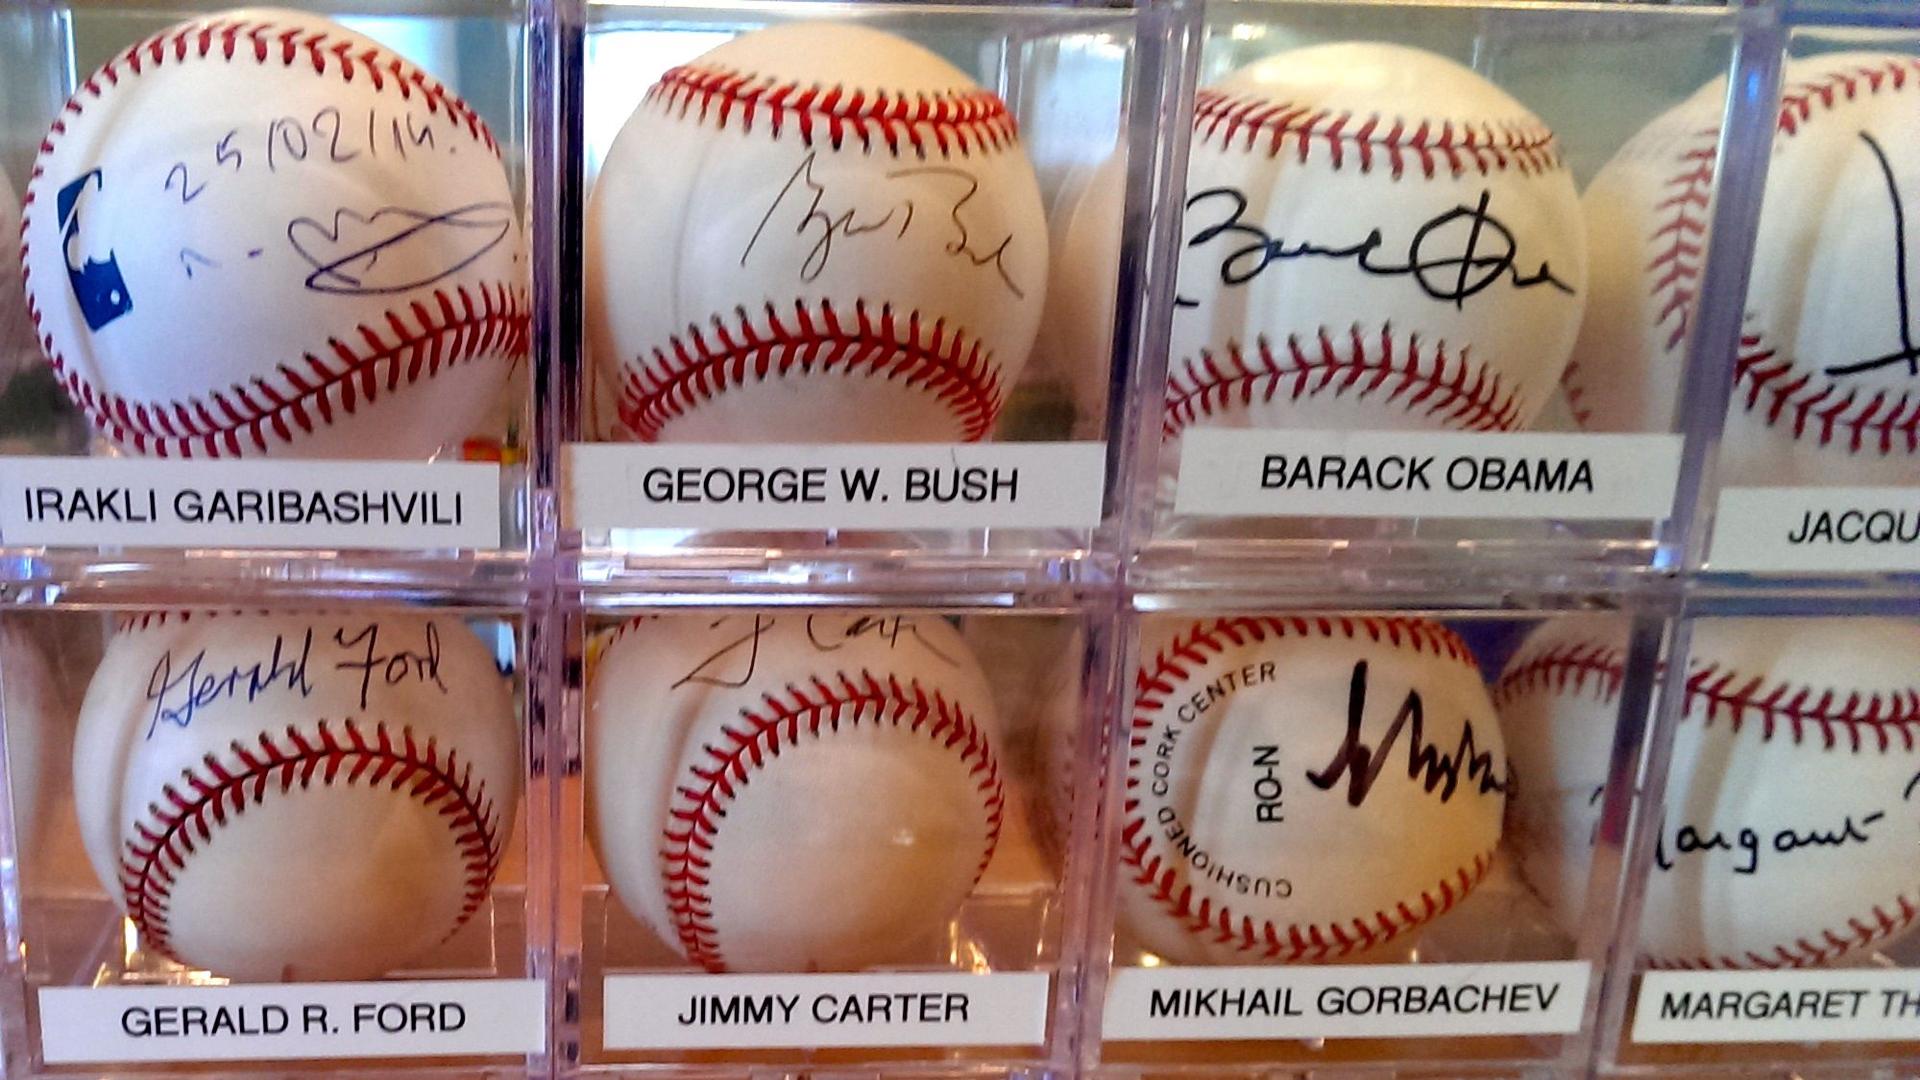 Some of the top names from the autograph collection of Randy Kaplan. He launched his collection in 1996, with the autograph of Bill Clinton, and has gathered 130 autographed baseballs to date.  